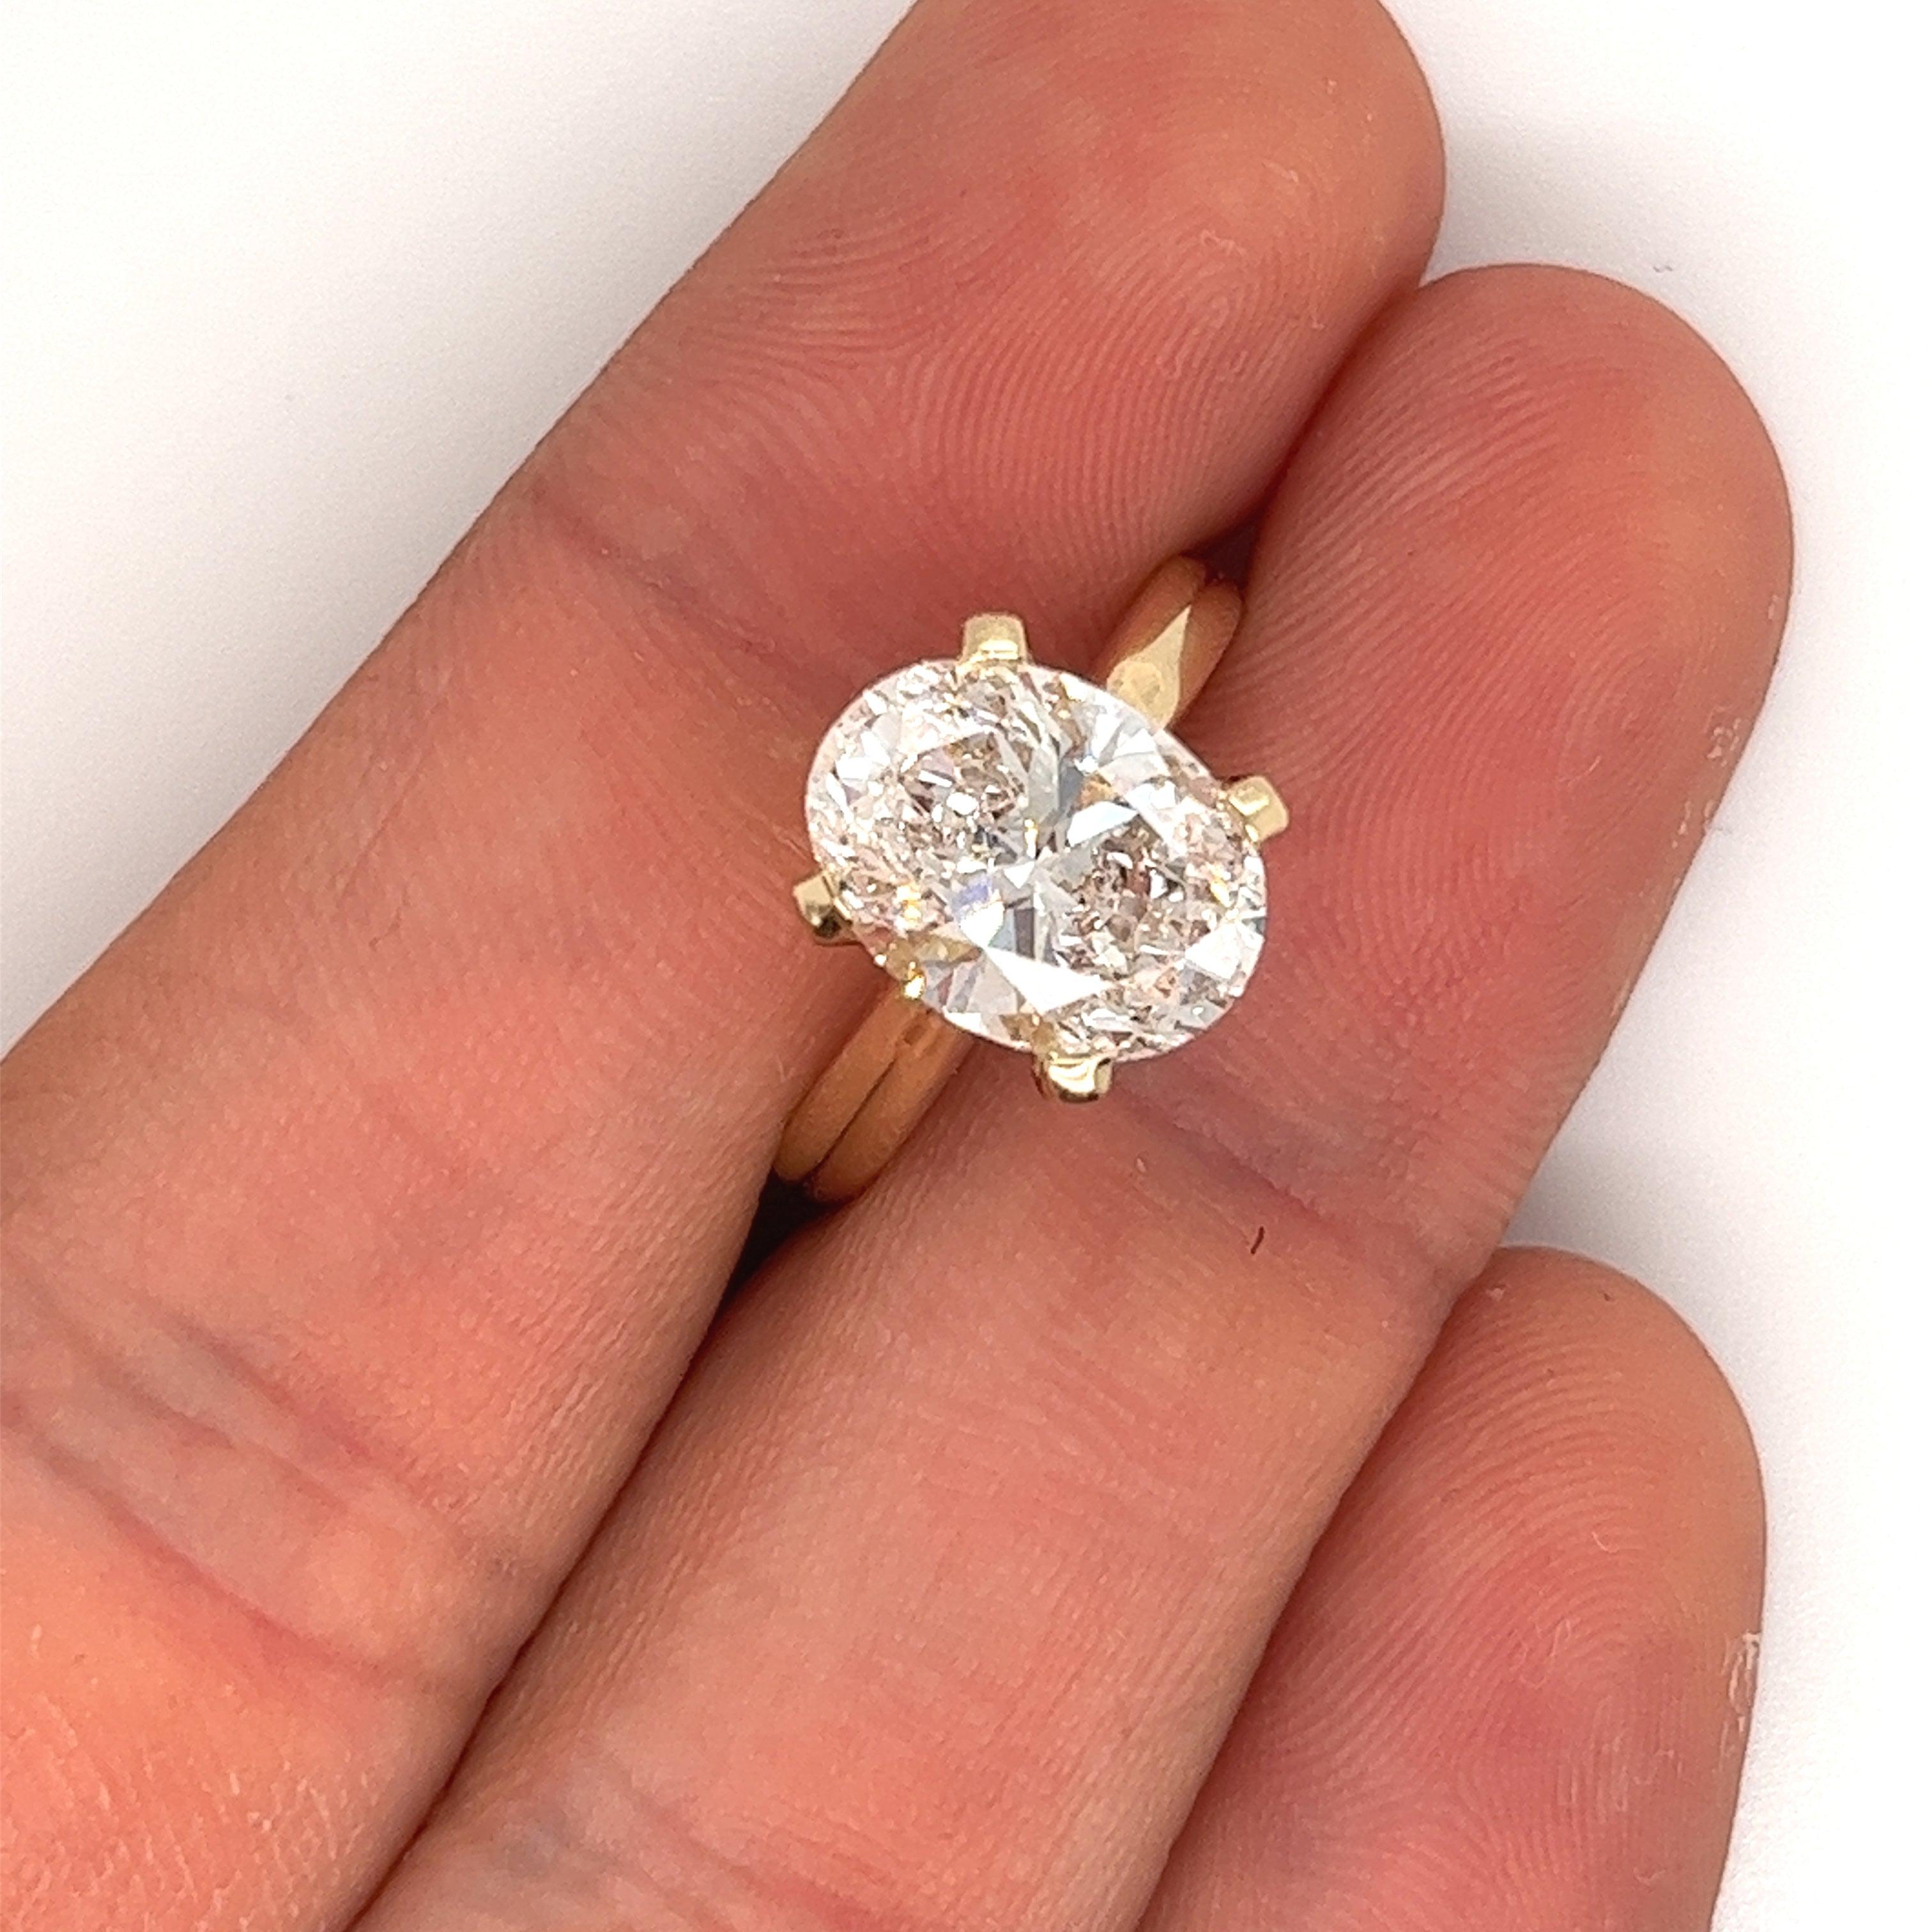 VS1 Lab Grown Diamond in 14k Yellow Gold Solitaire Ring-Rings-ASSAY